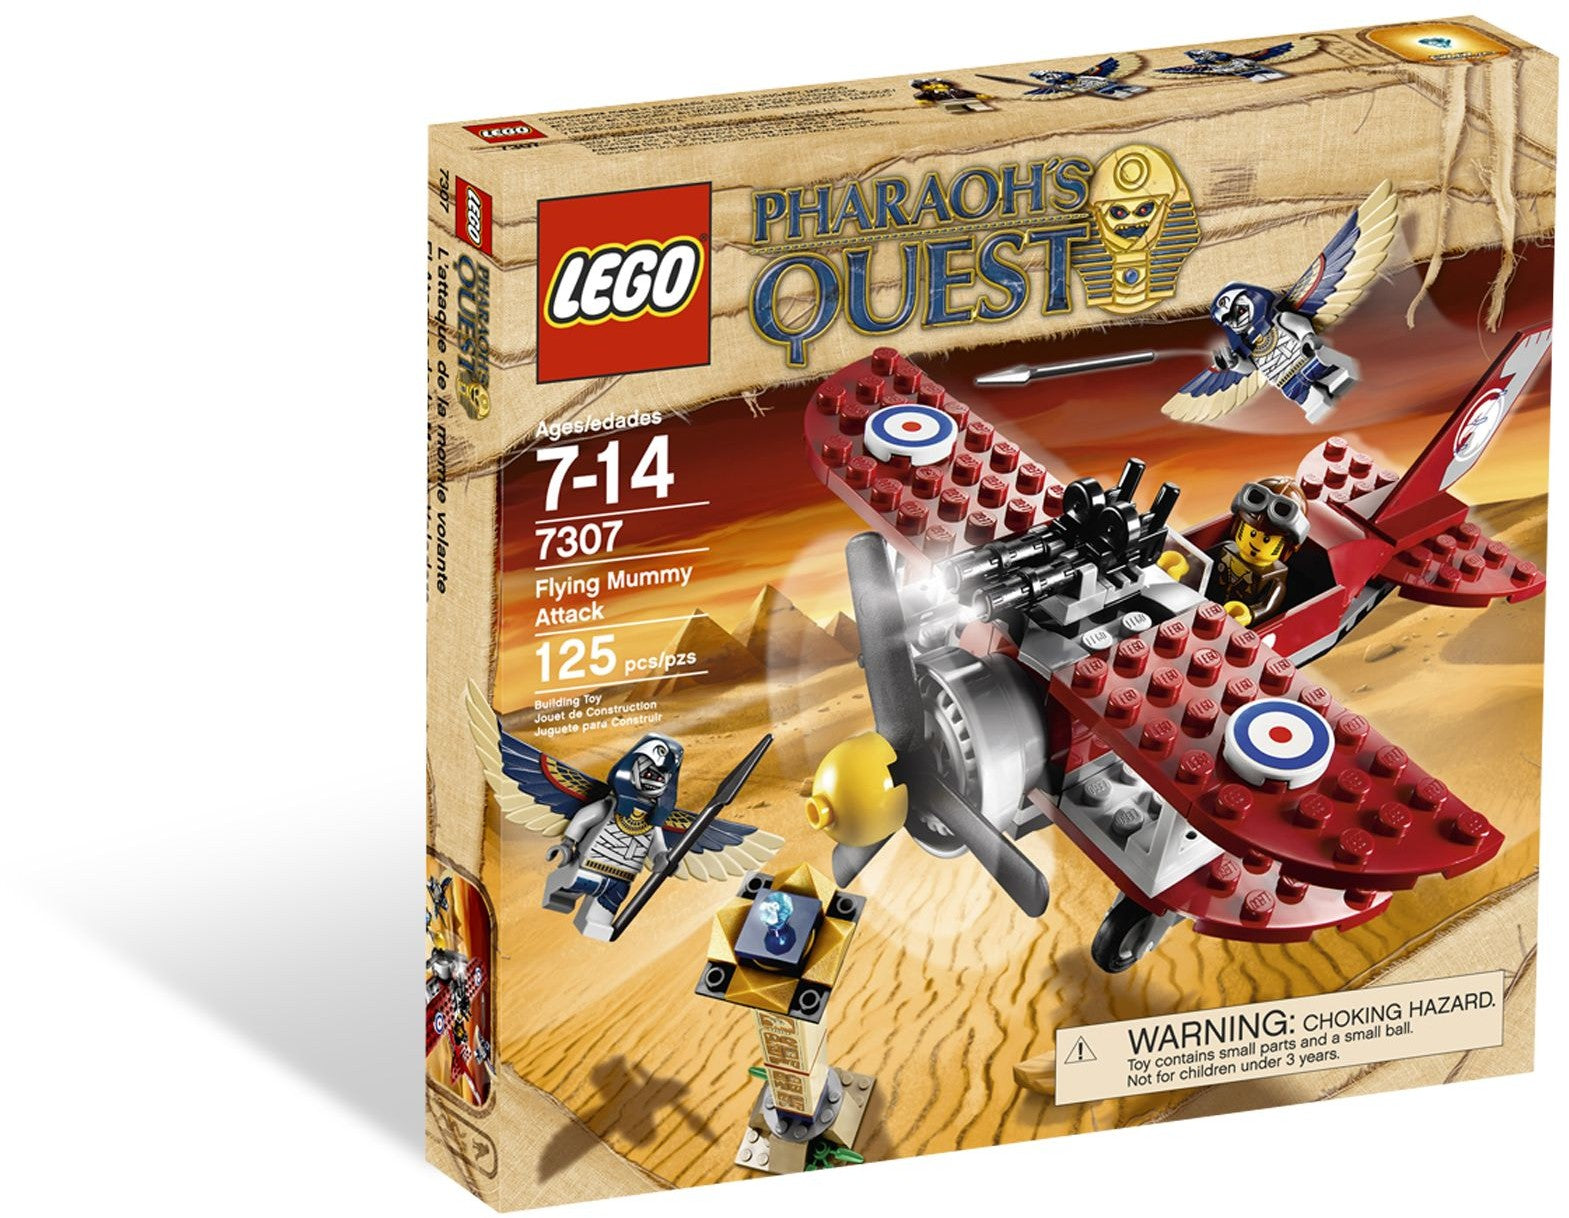 Lego Pharaoh's Quest 7307 - Flying Mummy Attack